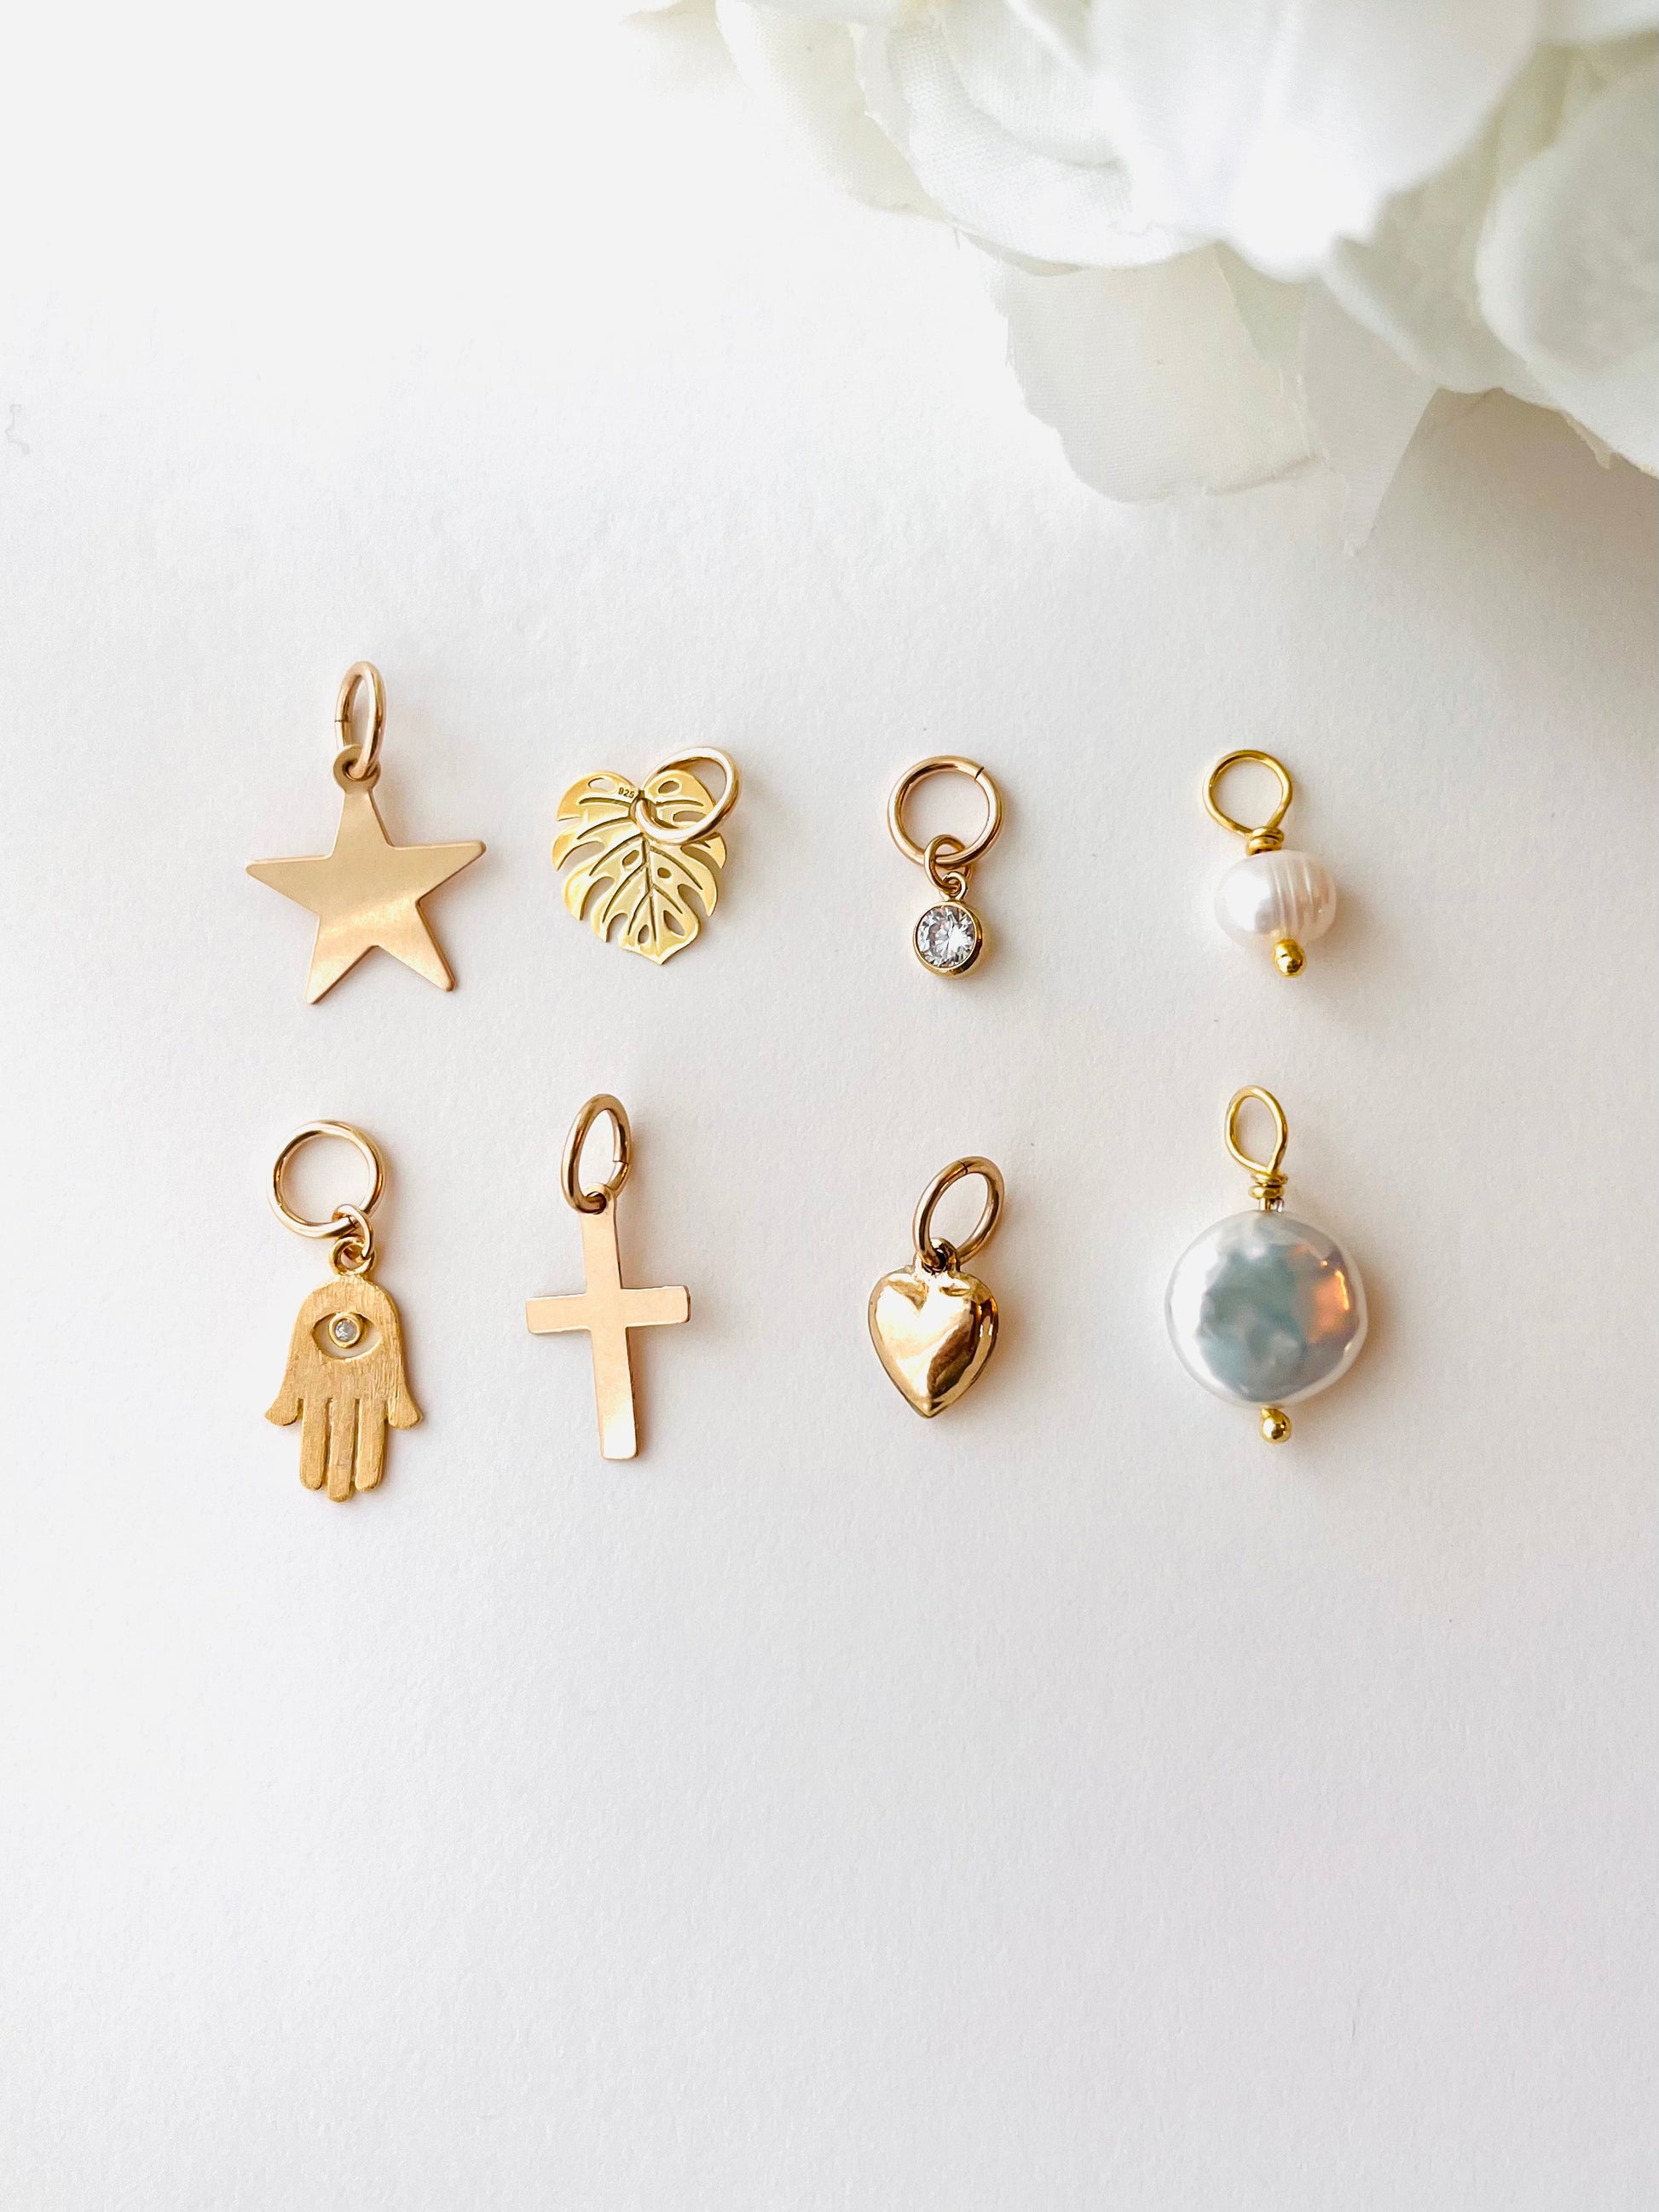 Coco Mix And Match Charm,  Pendant,  Add ons, Add Extra Charm To Your Hoop Earring, Hoop Charms, Leaf Charms, Star charms, Pearl Charms, Cross charms